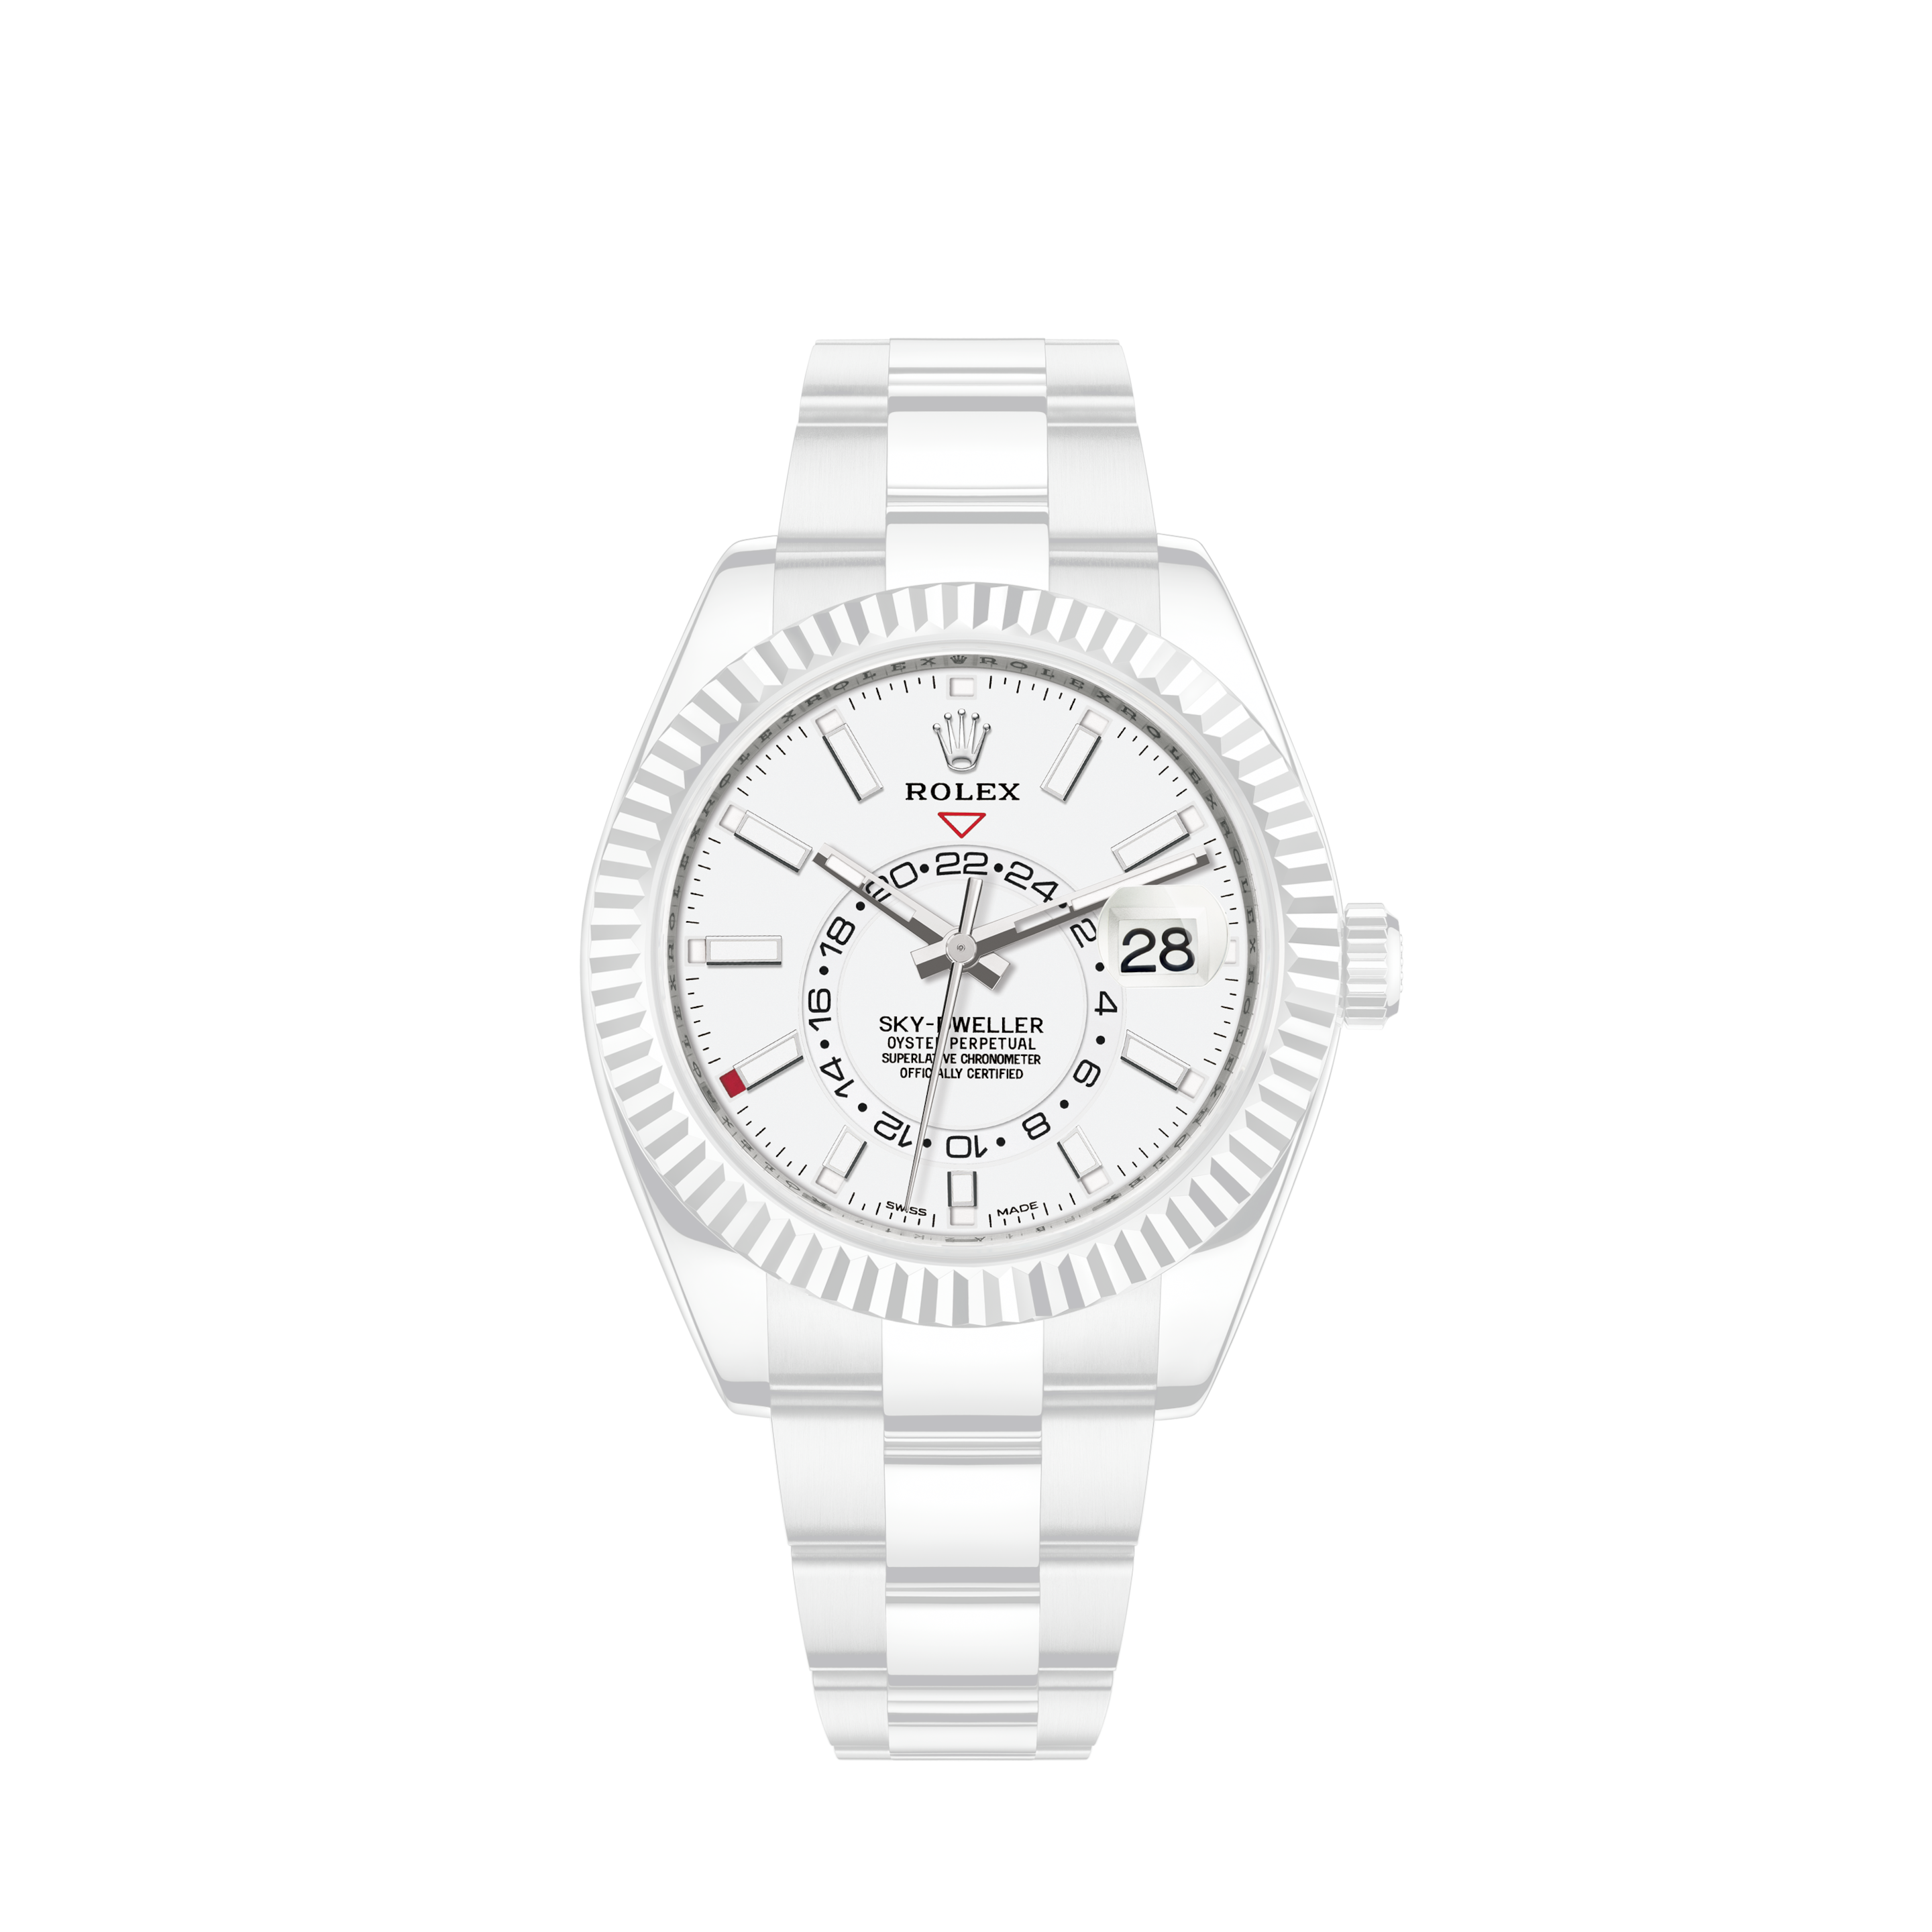 Rolex 36mm Datejust Silver Color Dial with Diamond Accent Stainless Steel Jubilee WatchRolex 36mm Datejust Silver Color Face with Diamond Numbers Emerald & Diamond Bezel Two Tone Watch